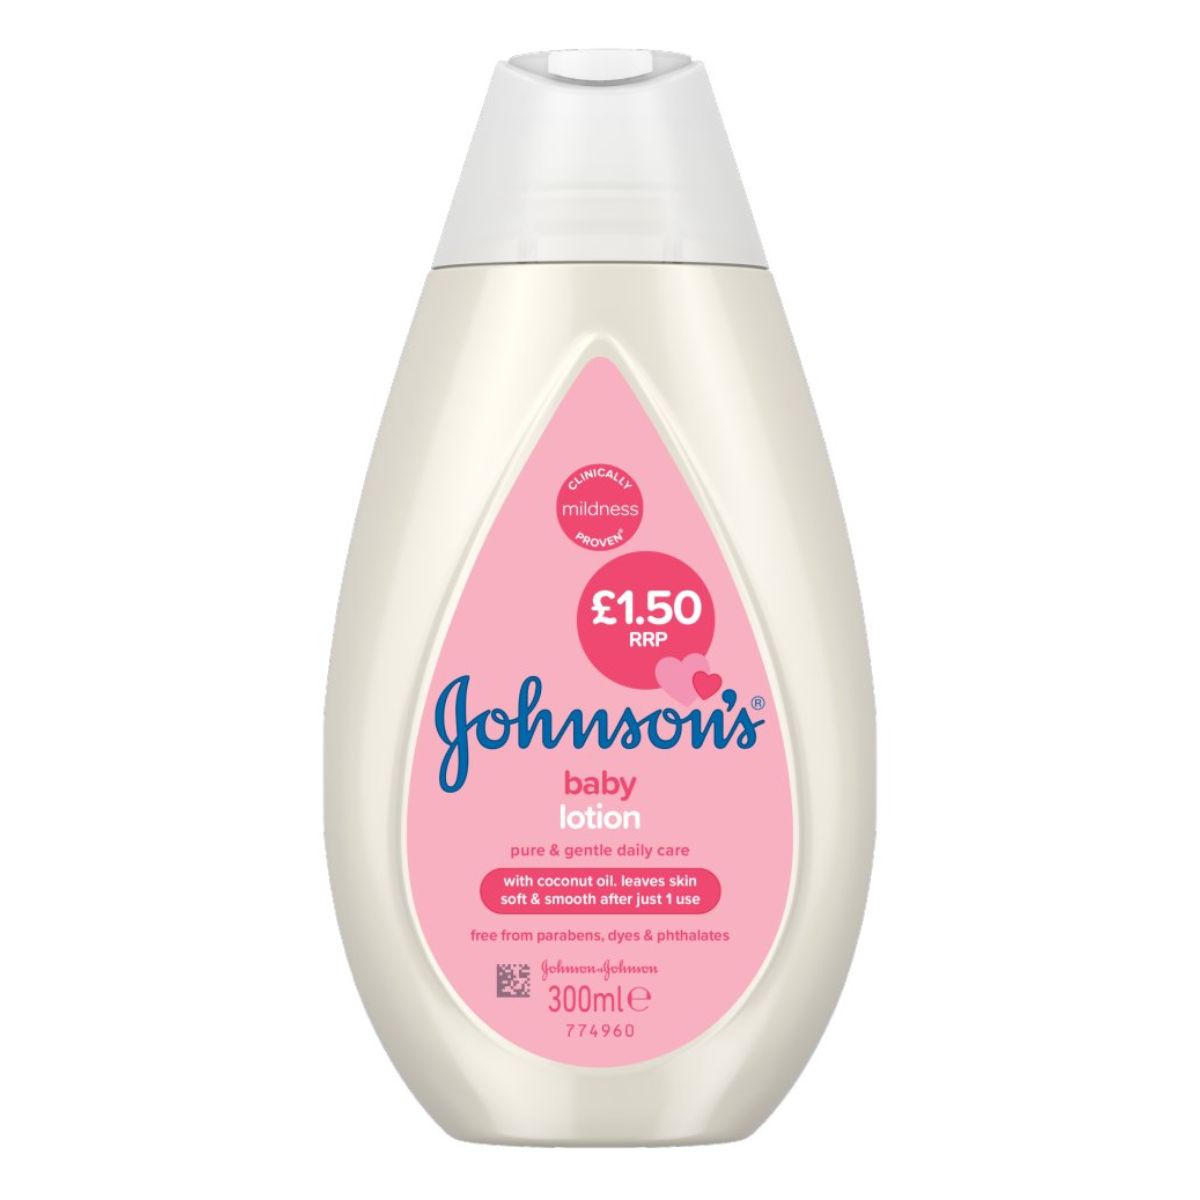 A bottle of Johnsons - Baby Lotion with coconut oil, 300ml, priced at £1.50.